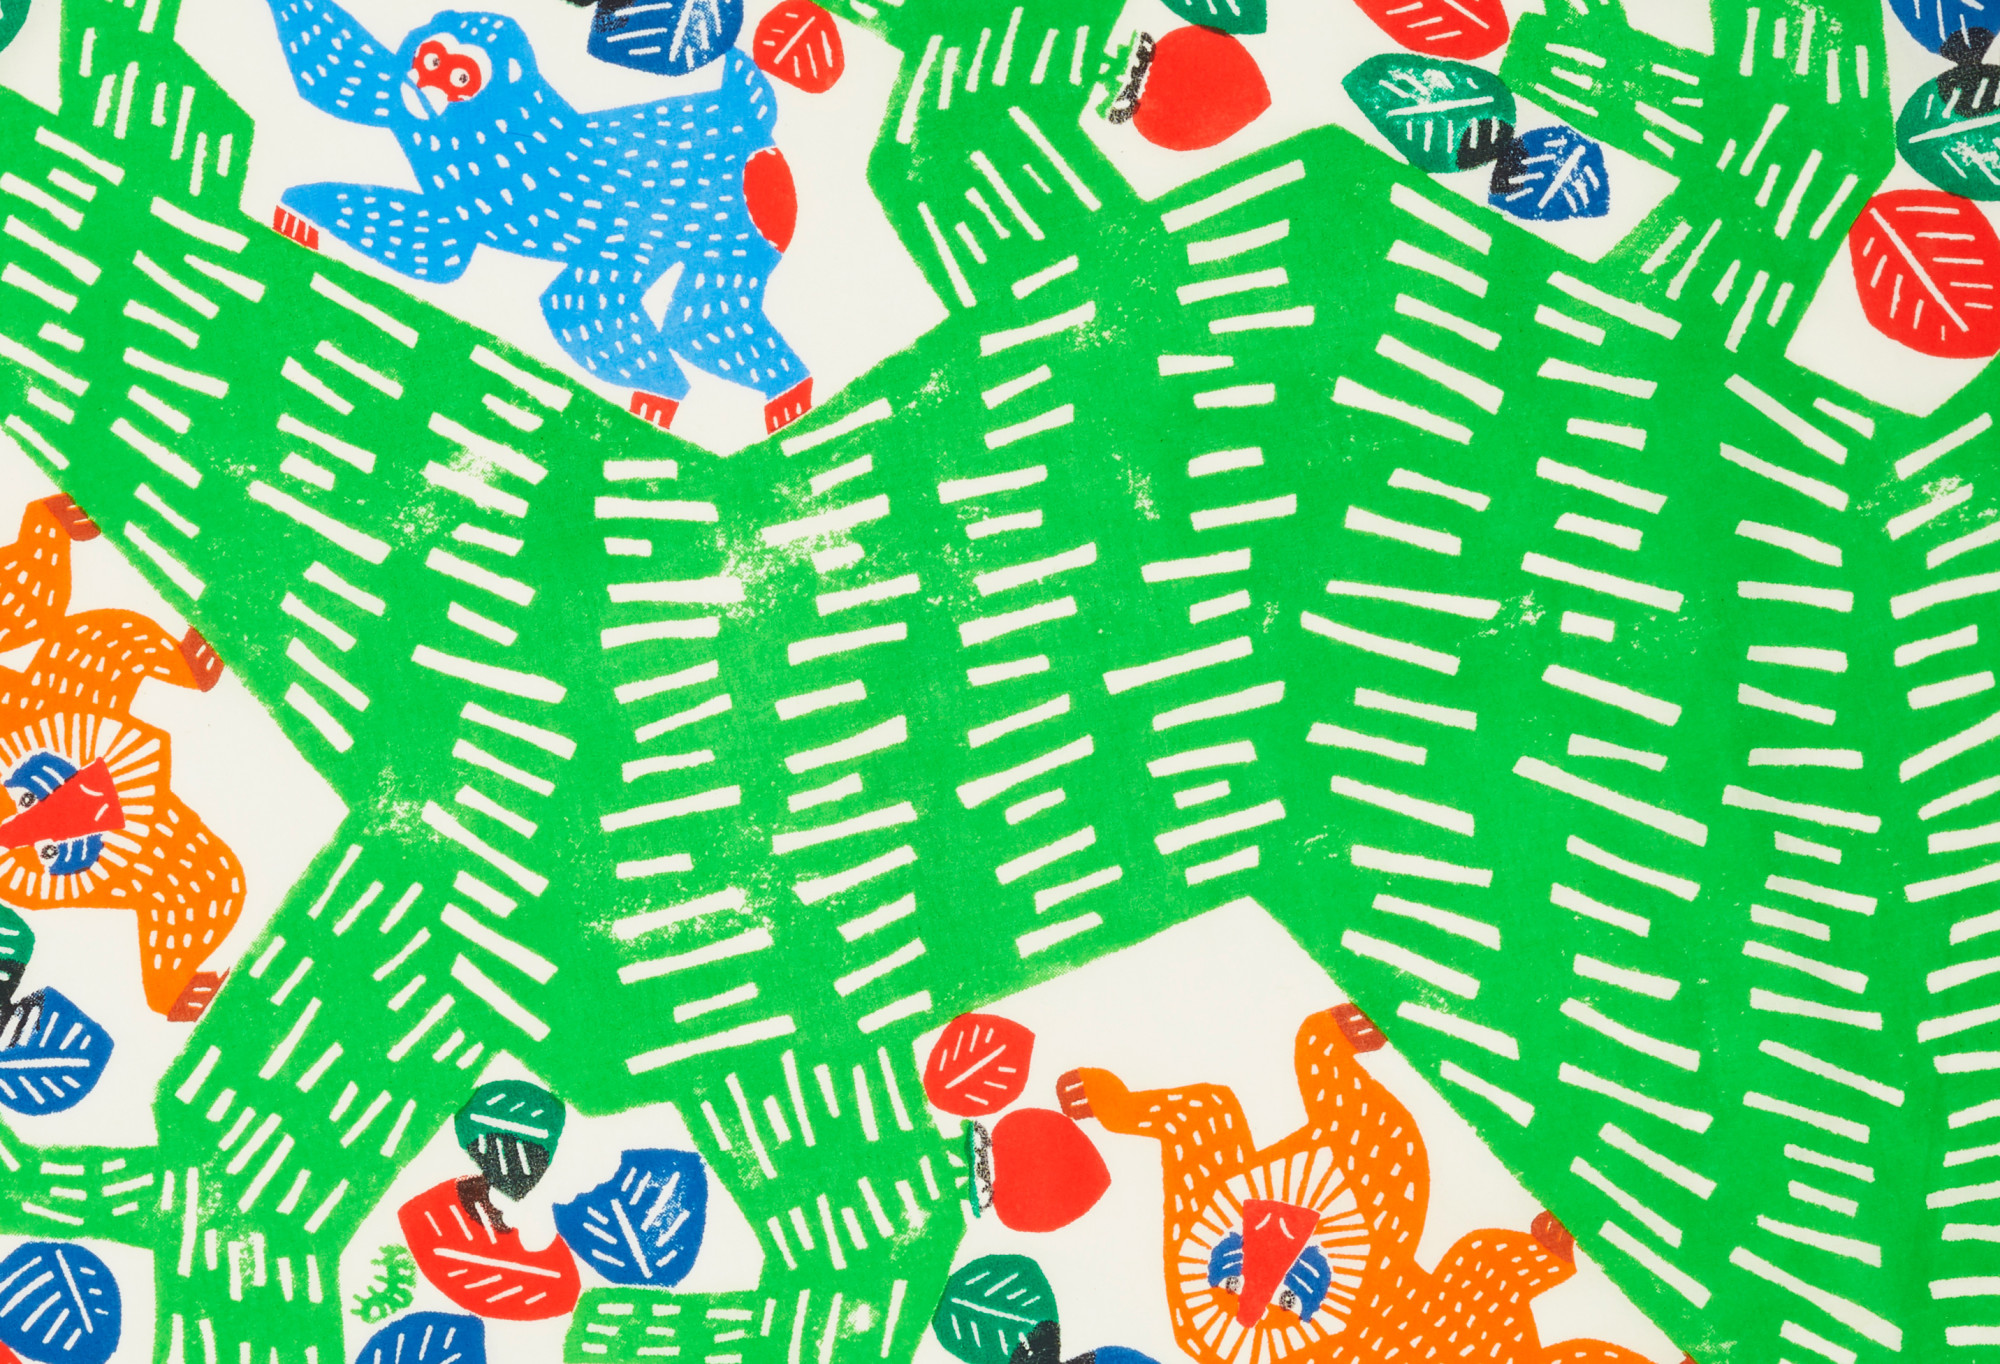 A close up of the Knot Wrap, focusing on the green tree and two monkeys, one blue, one orange.